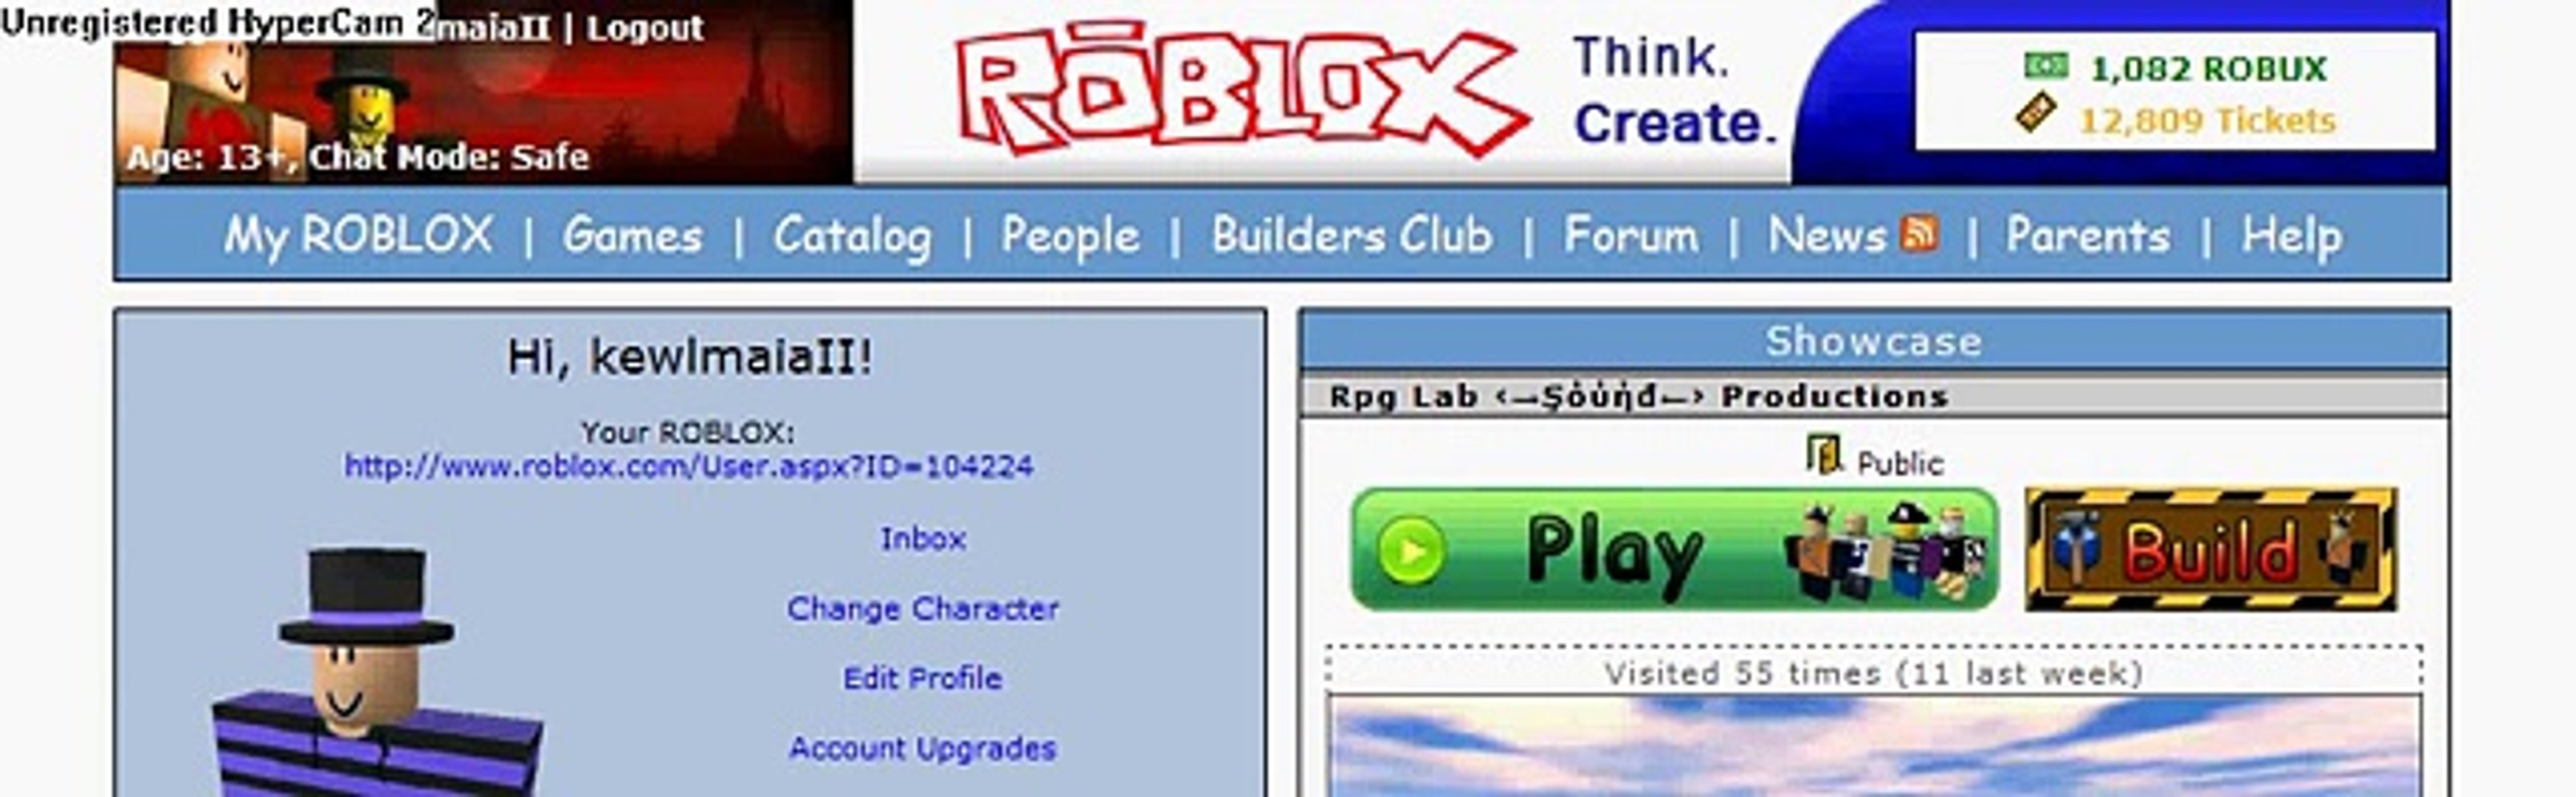 Roblox Teaser Video Dailymotion - my roblox profile id